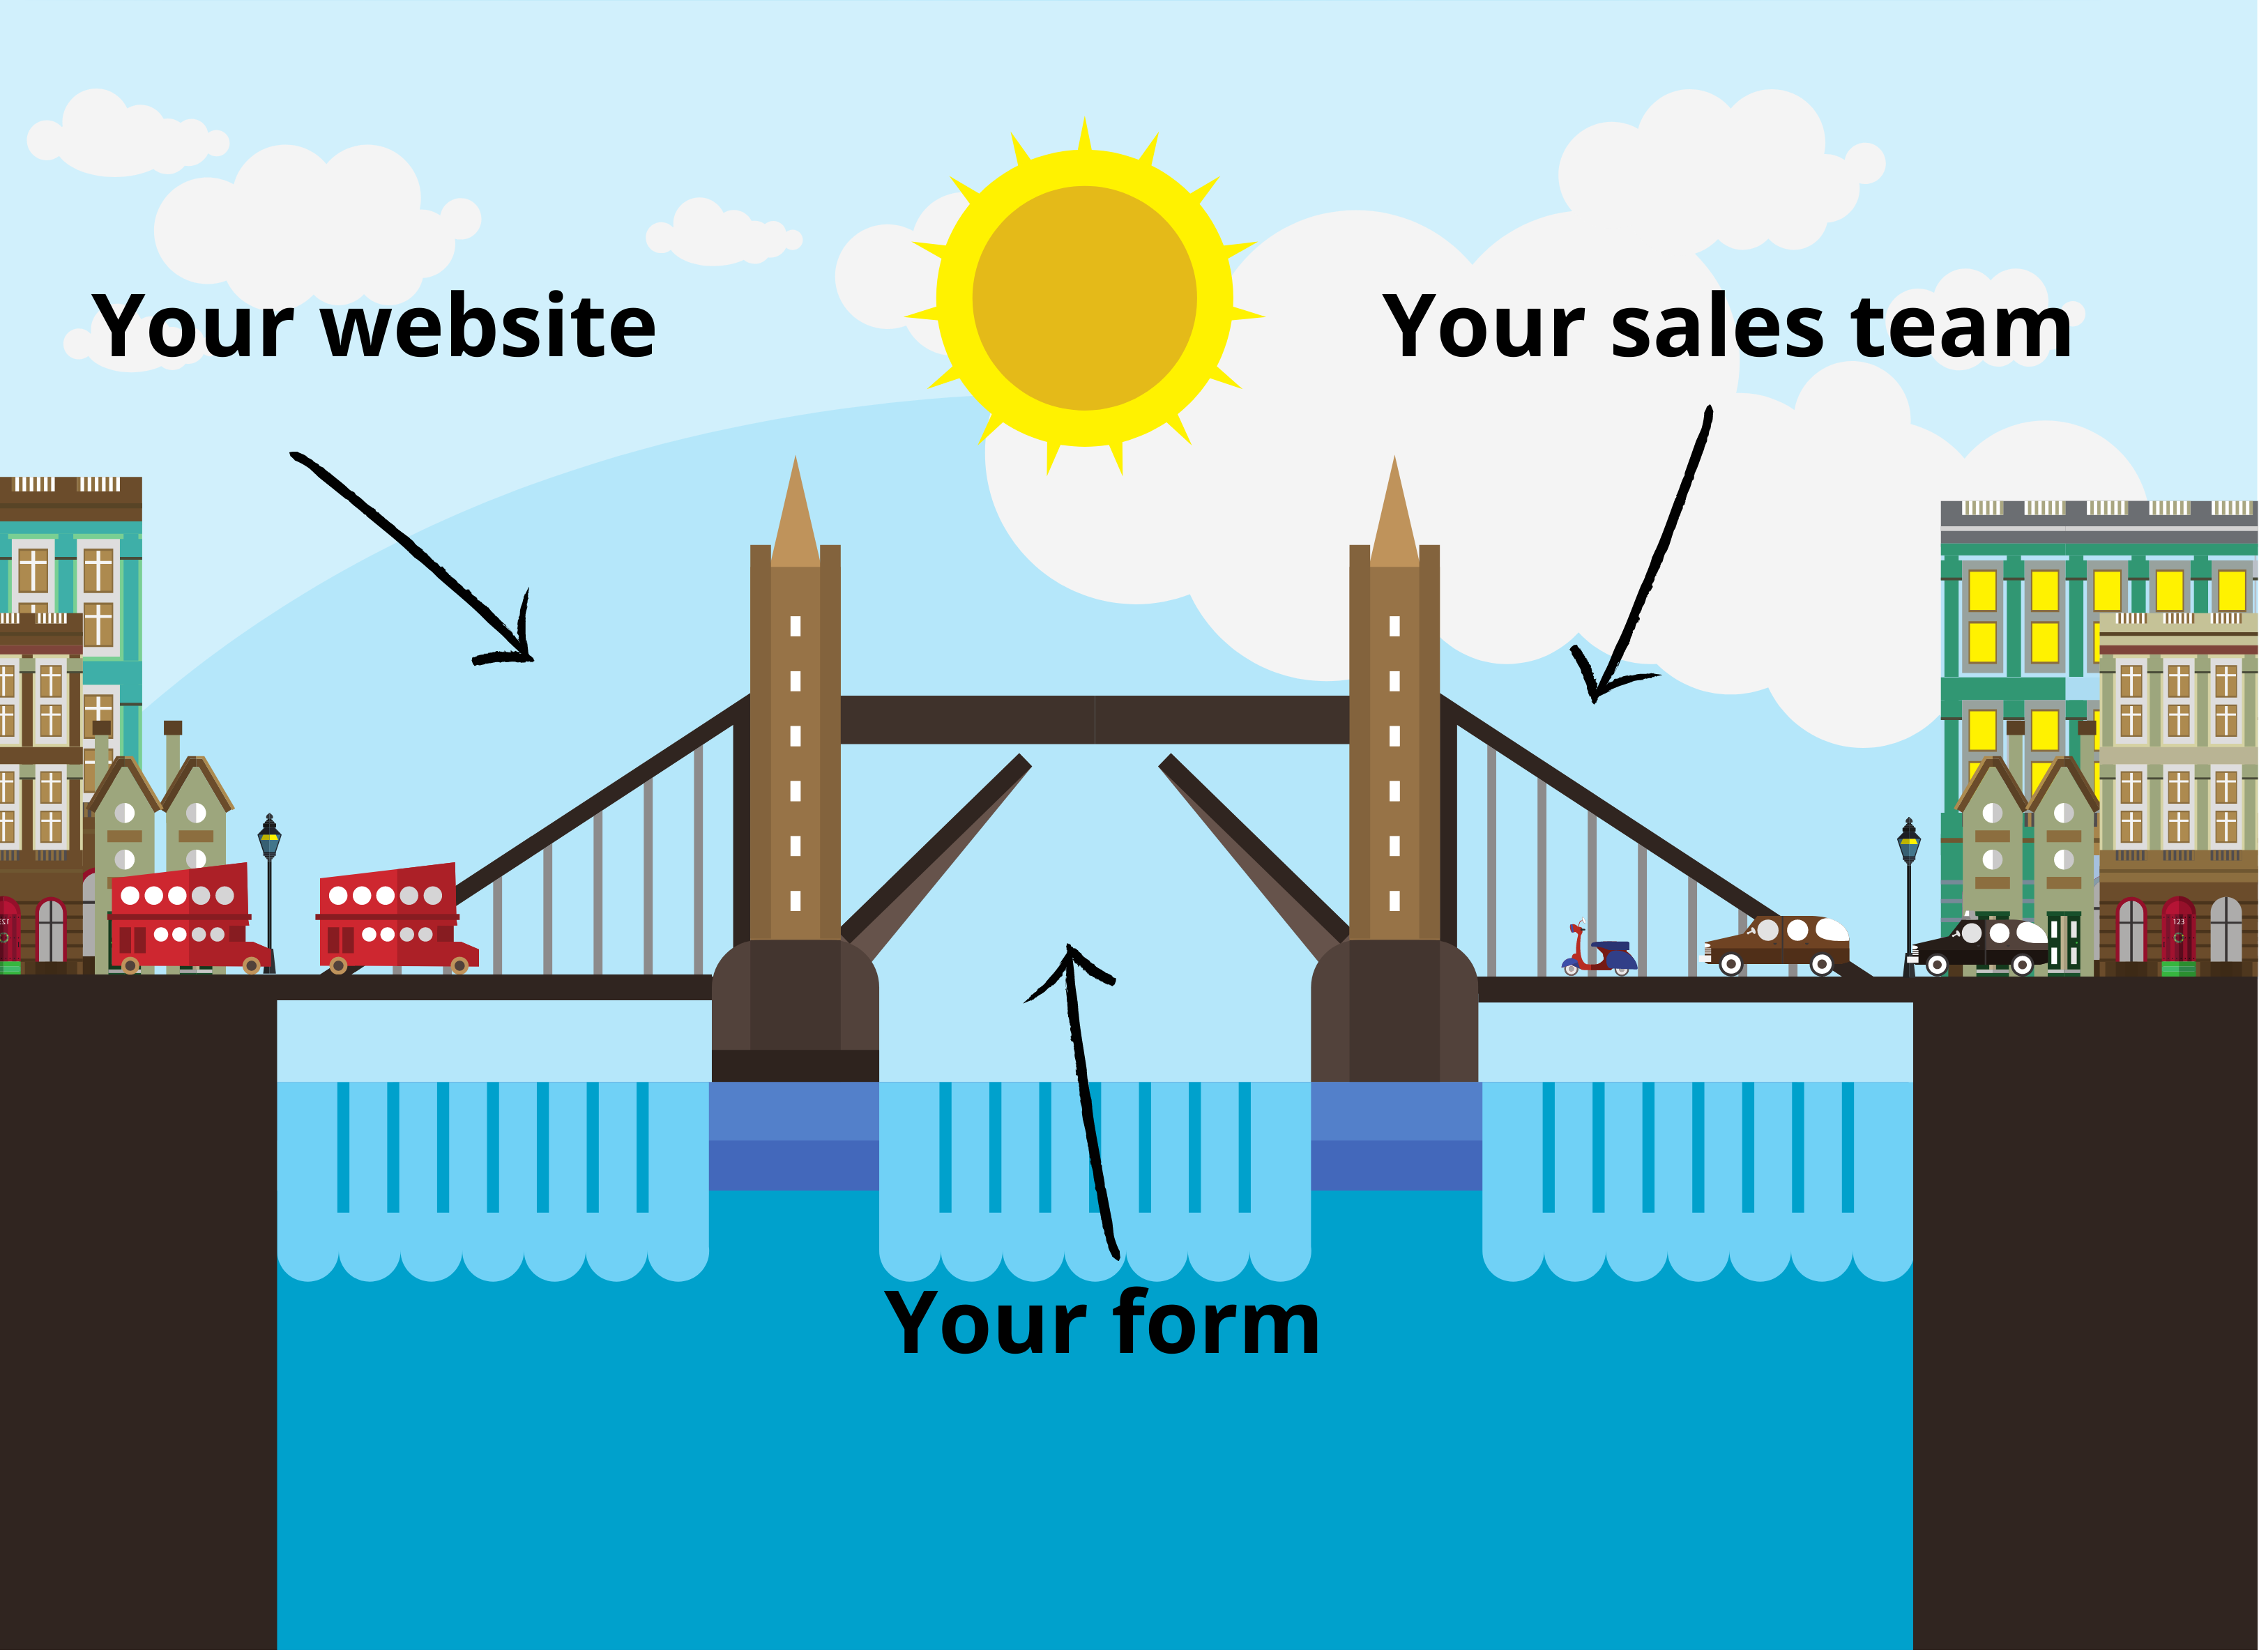 your form is a bridge to your sales team